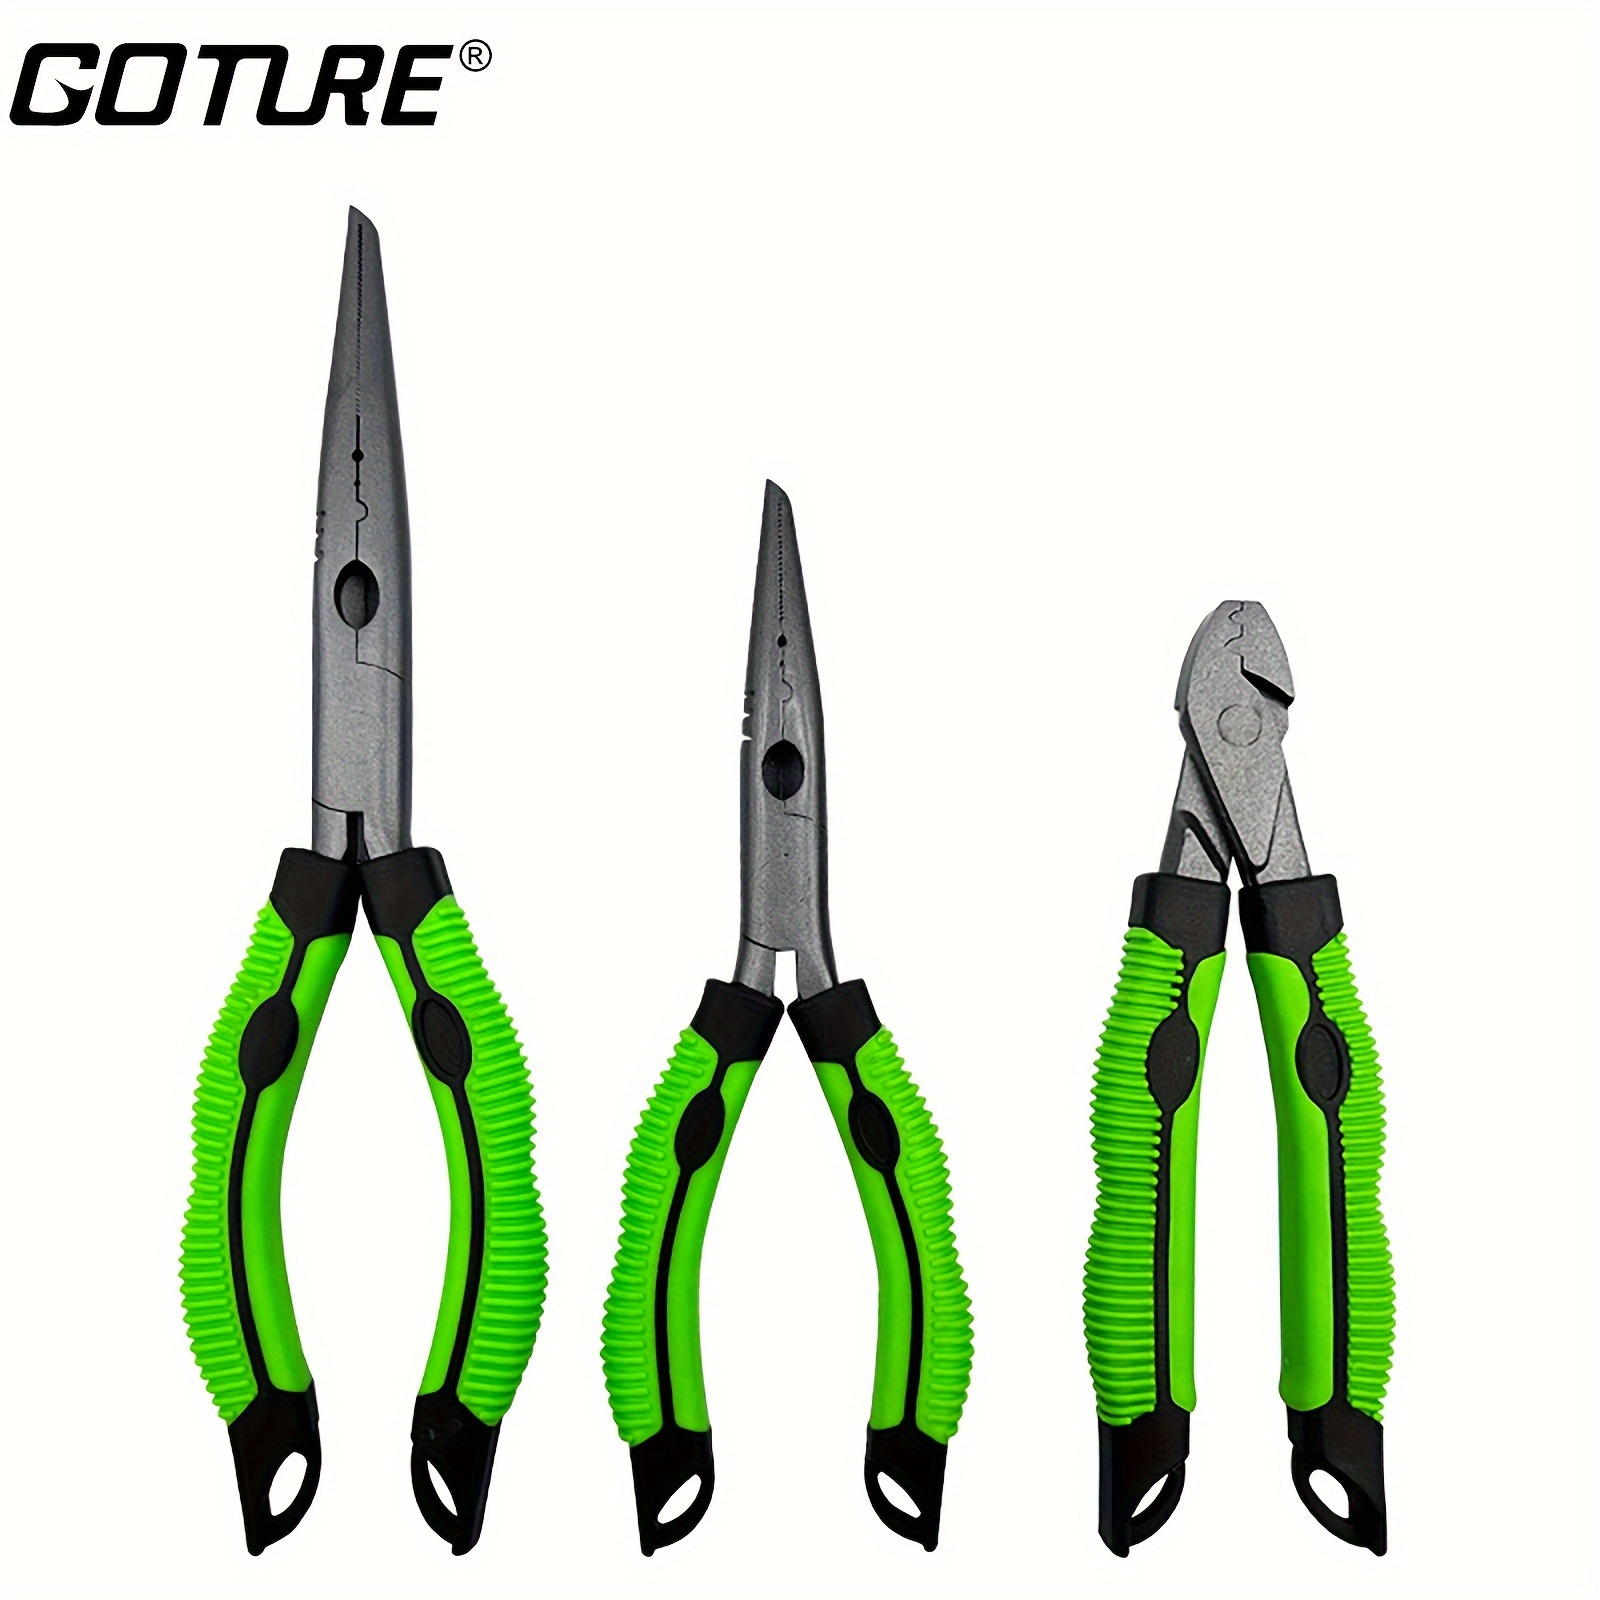 Carp Fishing Tools Crimping Plier PTFE Coating Stainless Steel